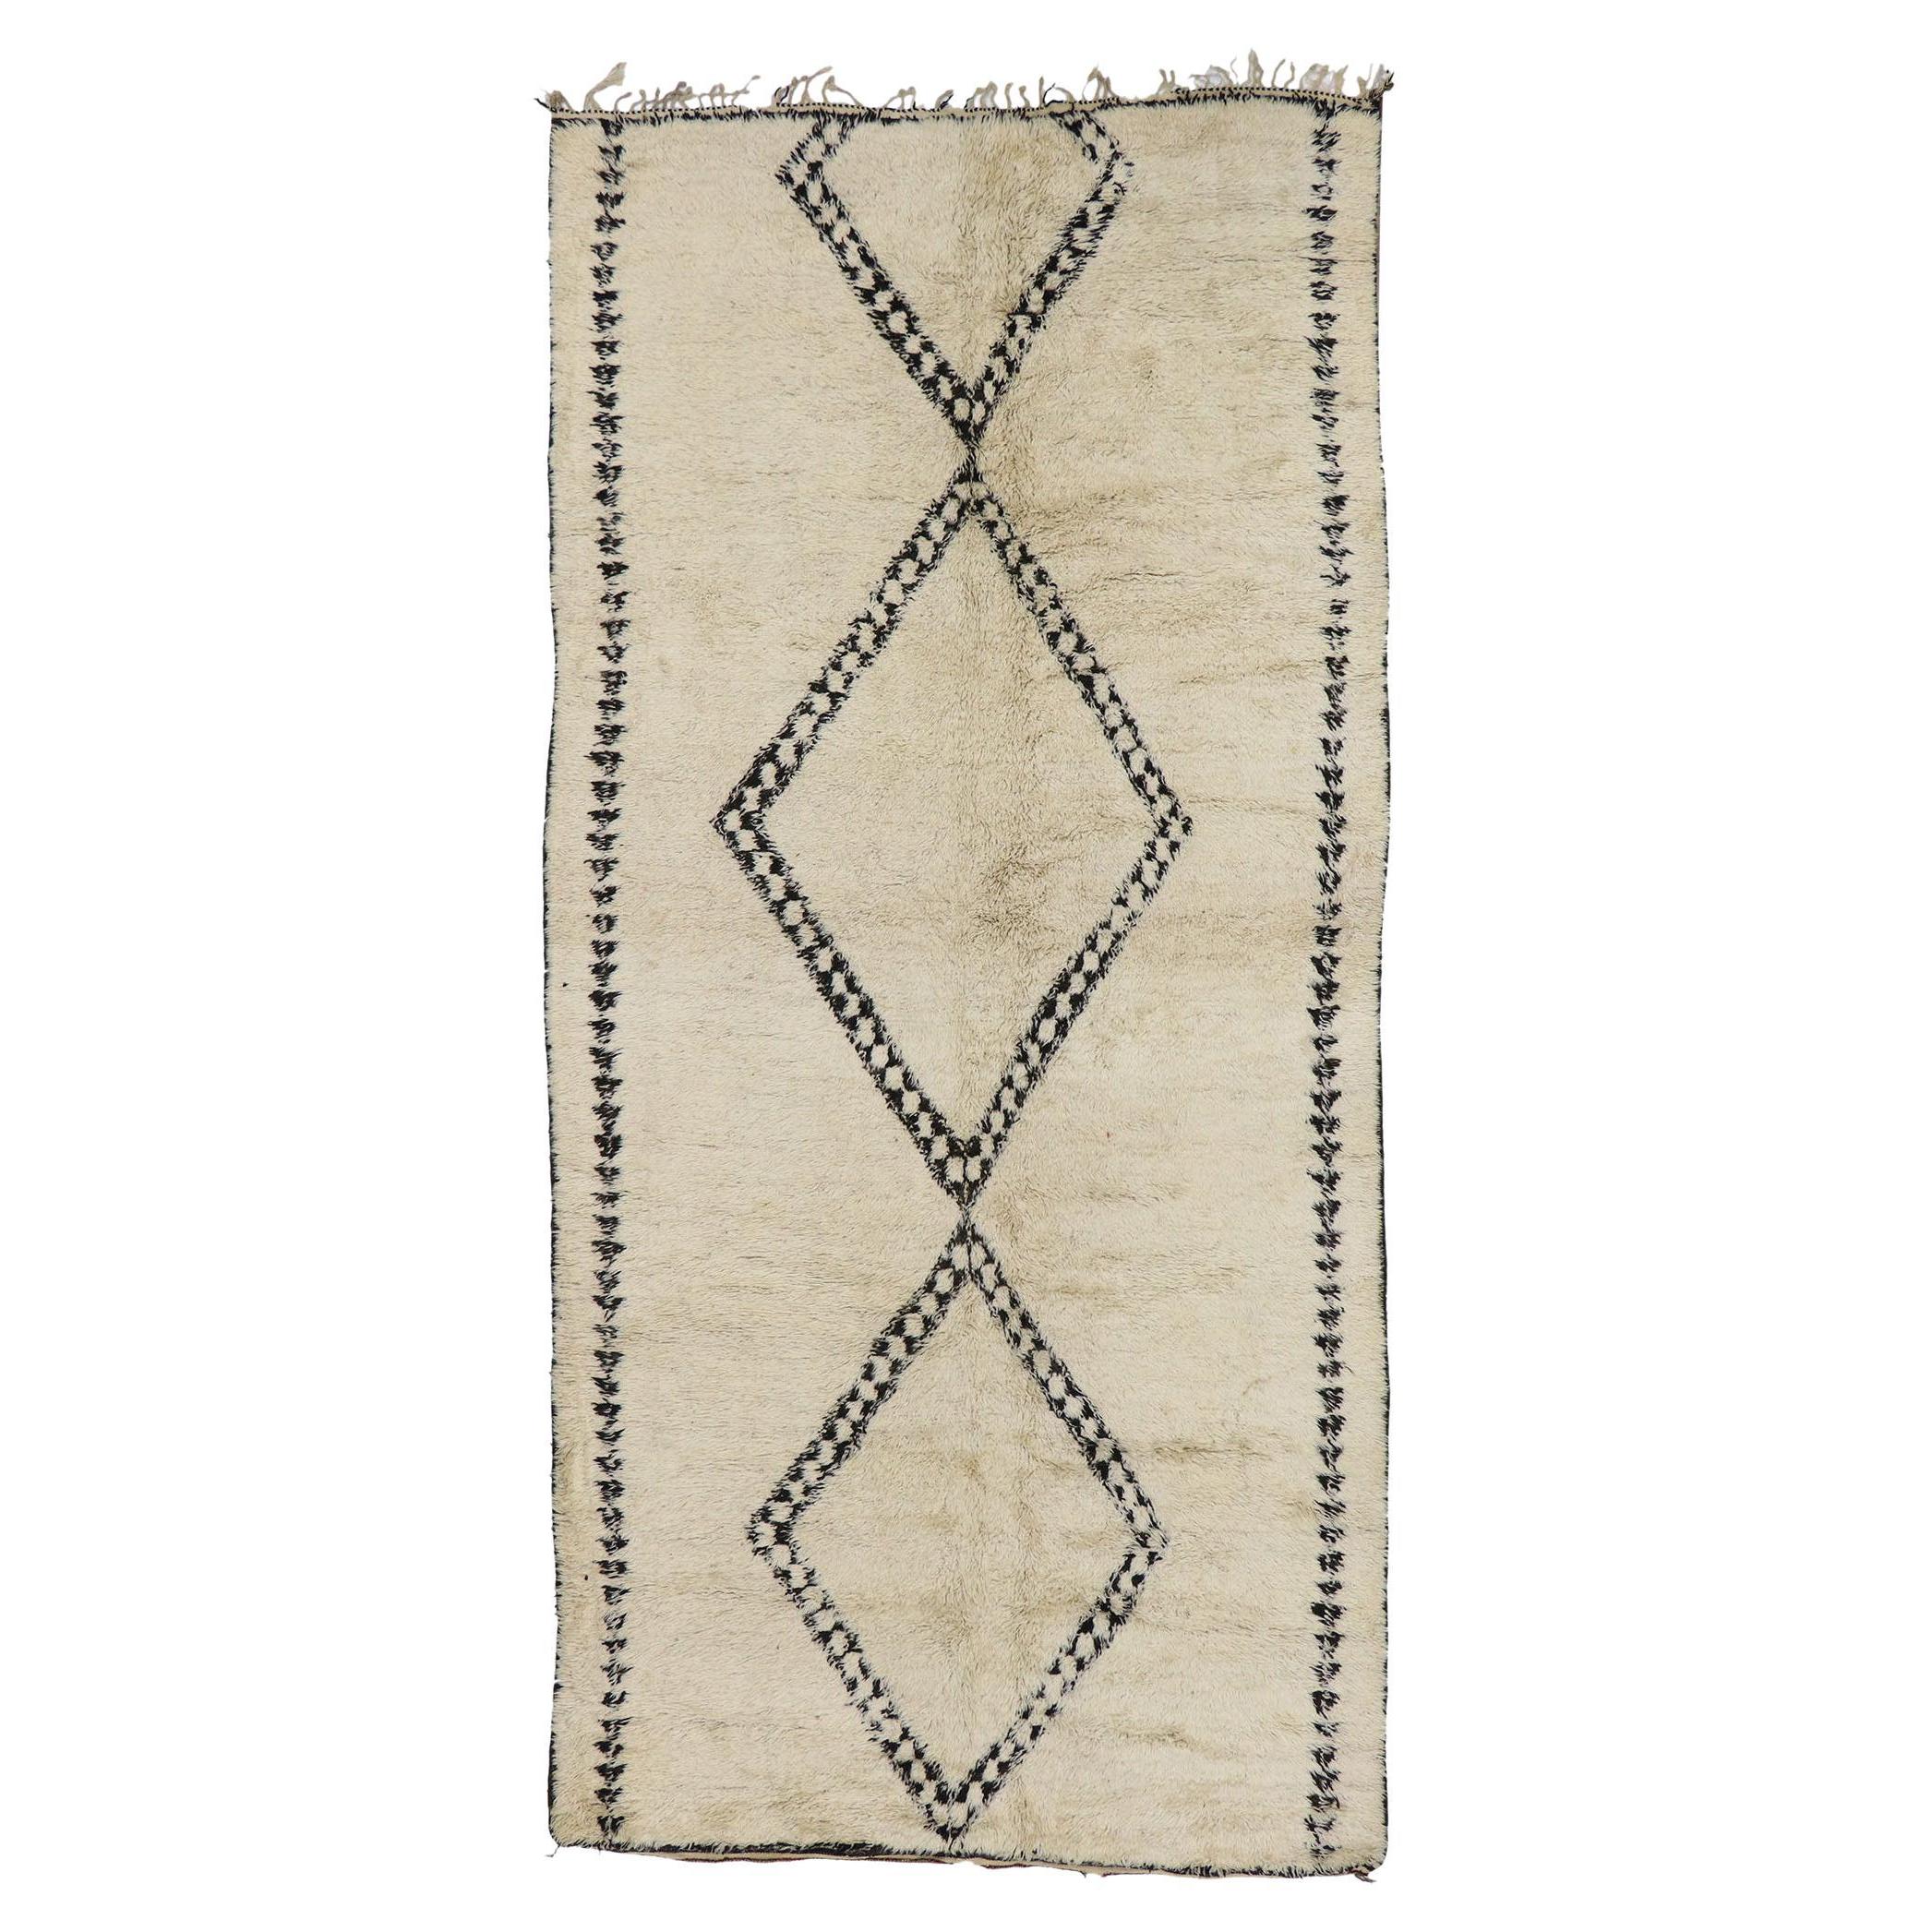 Vintage Berber Beni Ourain Moroccan Rug with Mid-Century Modern Style For Sale